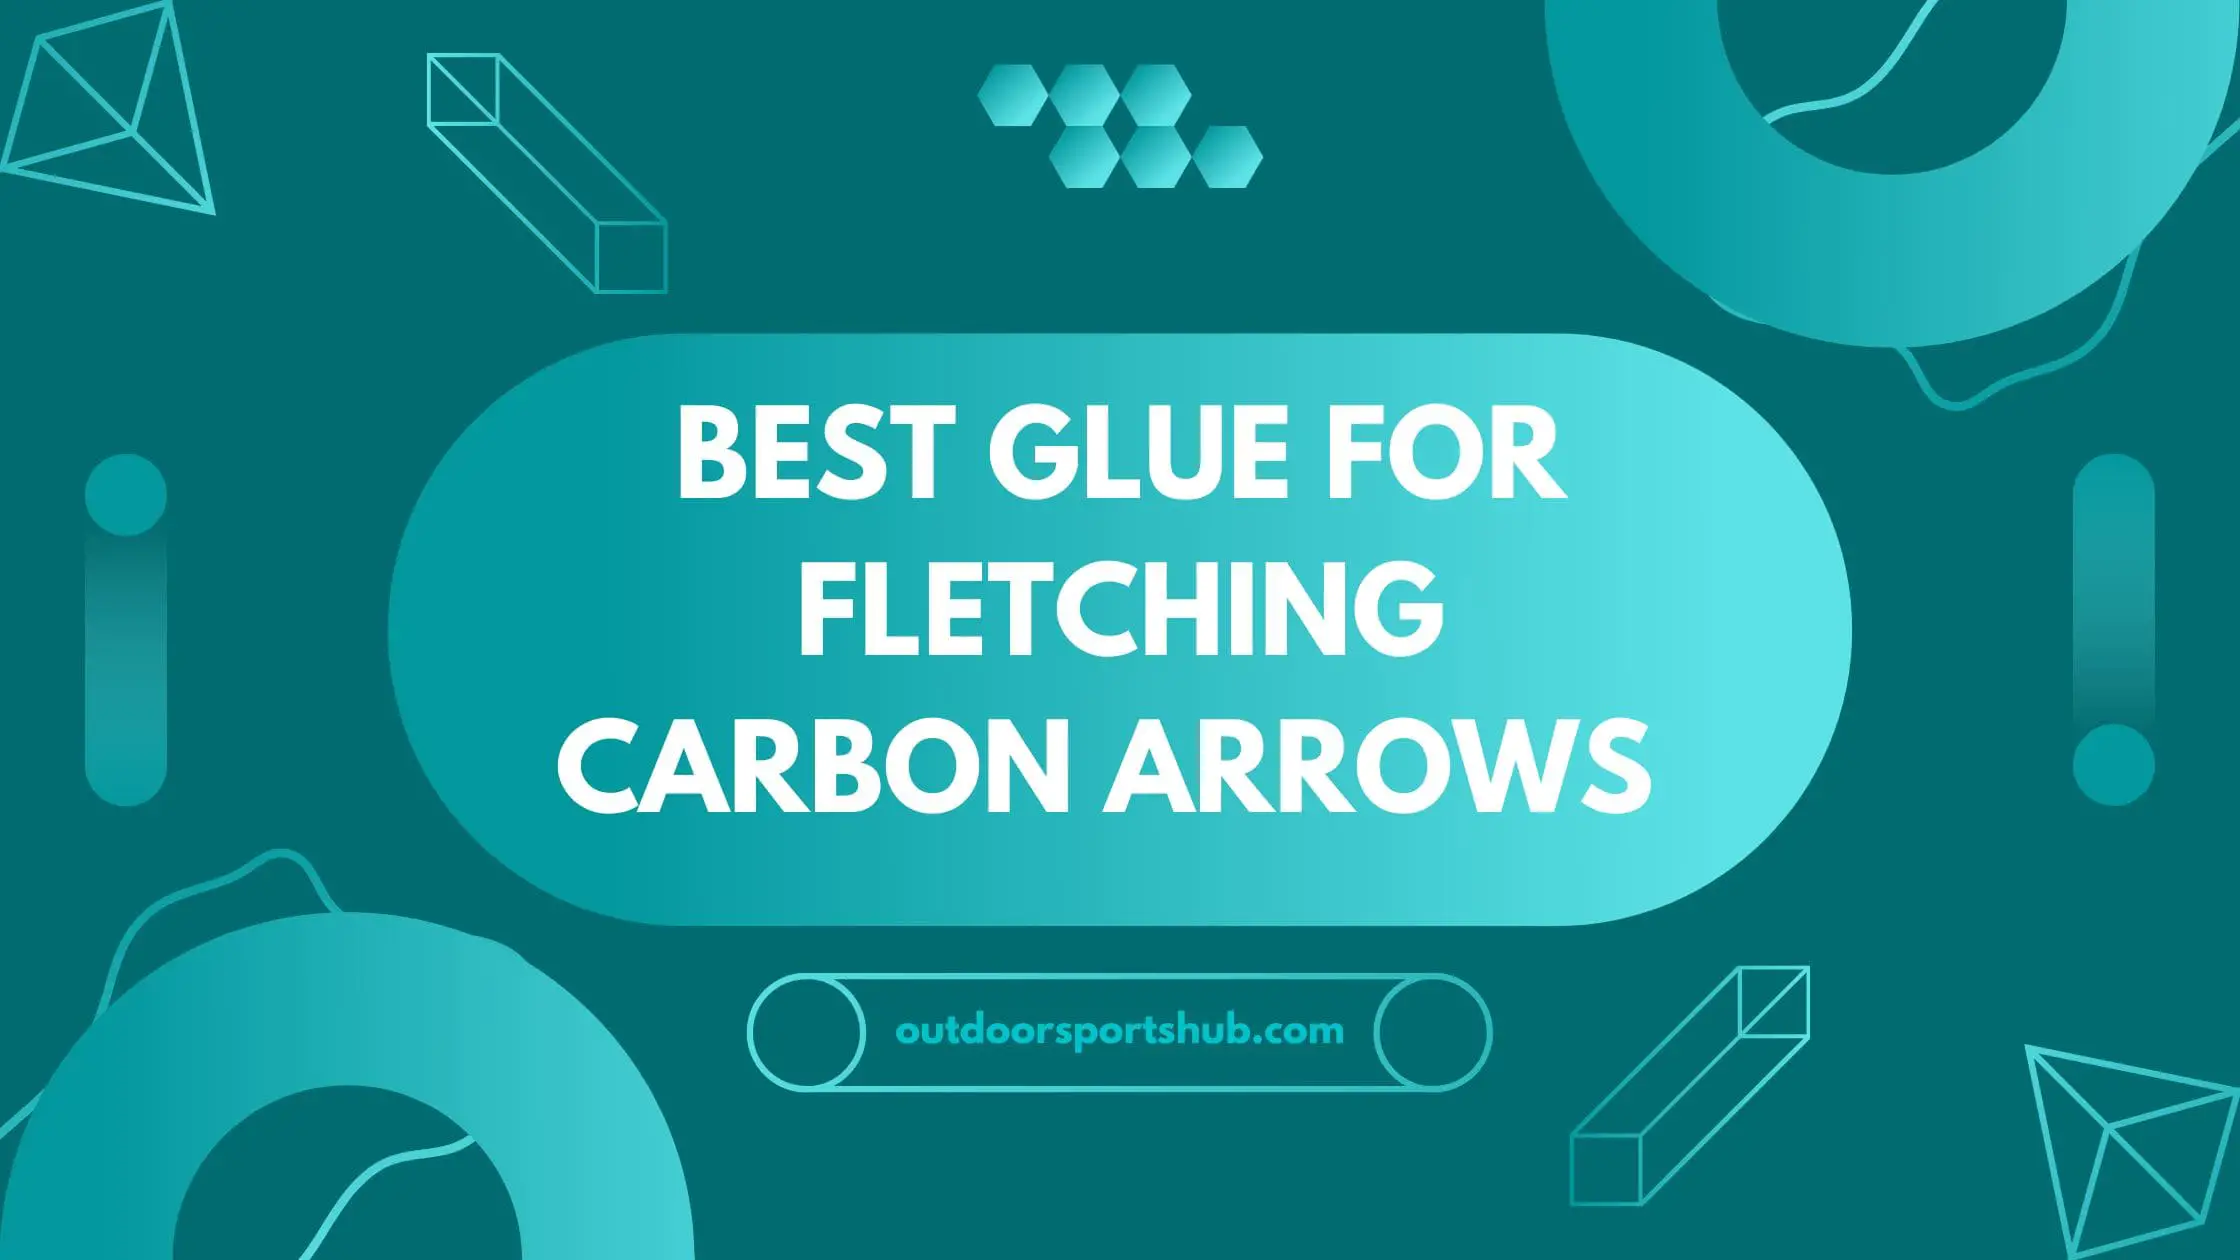 Best Glue for fletching carbon arrows